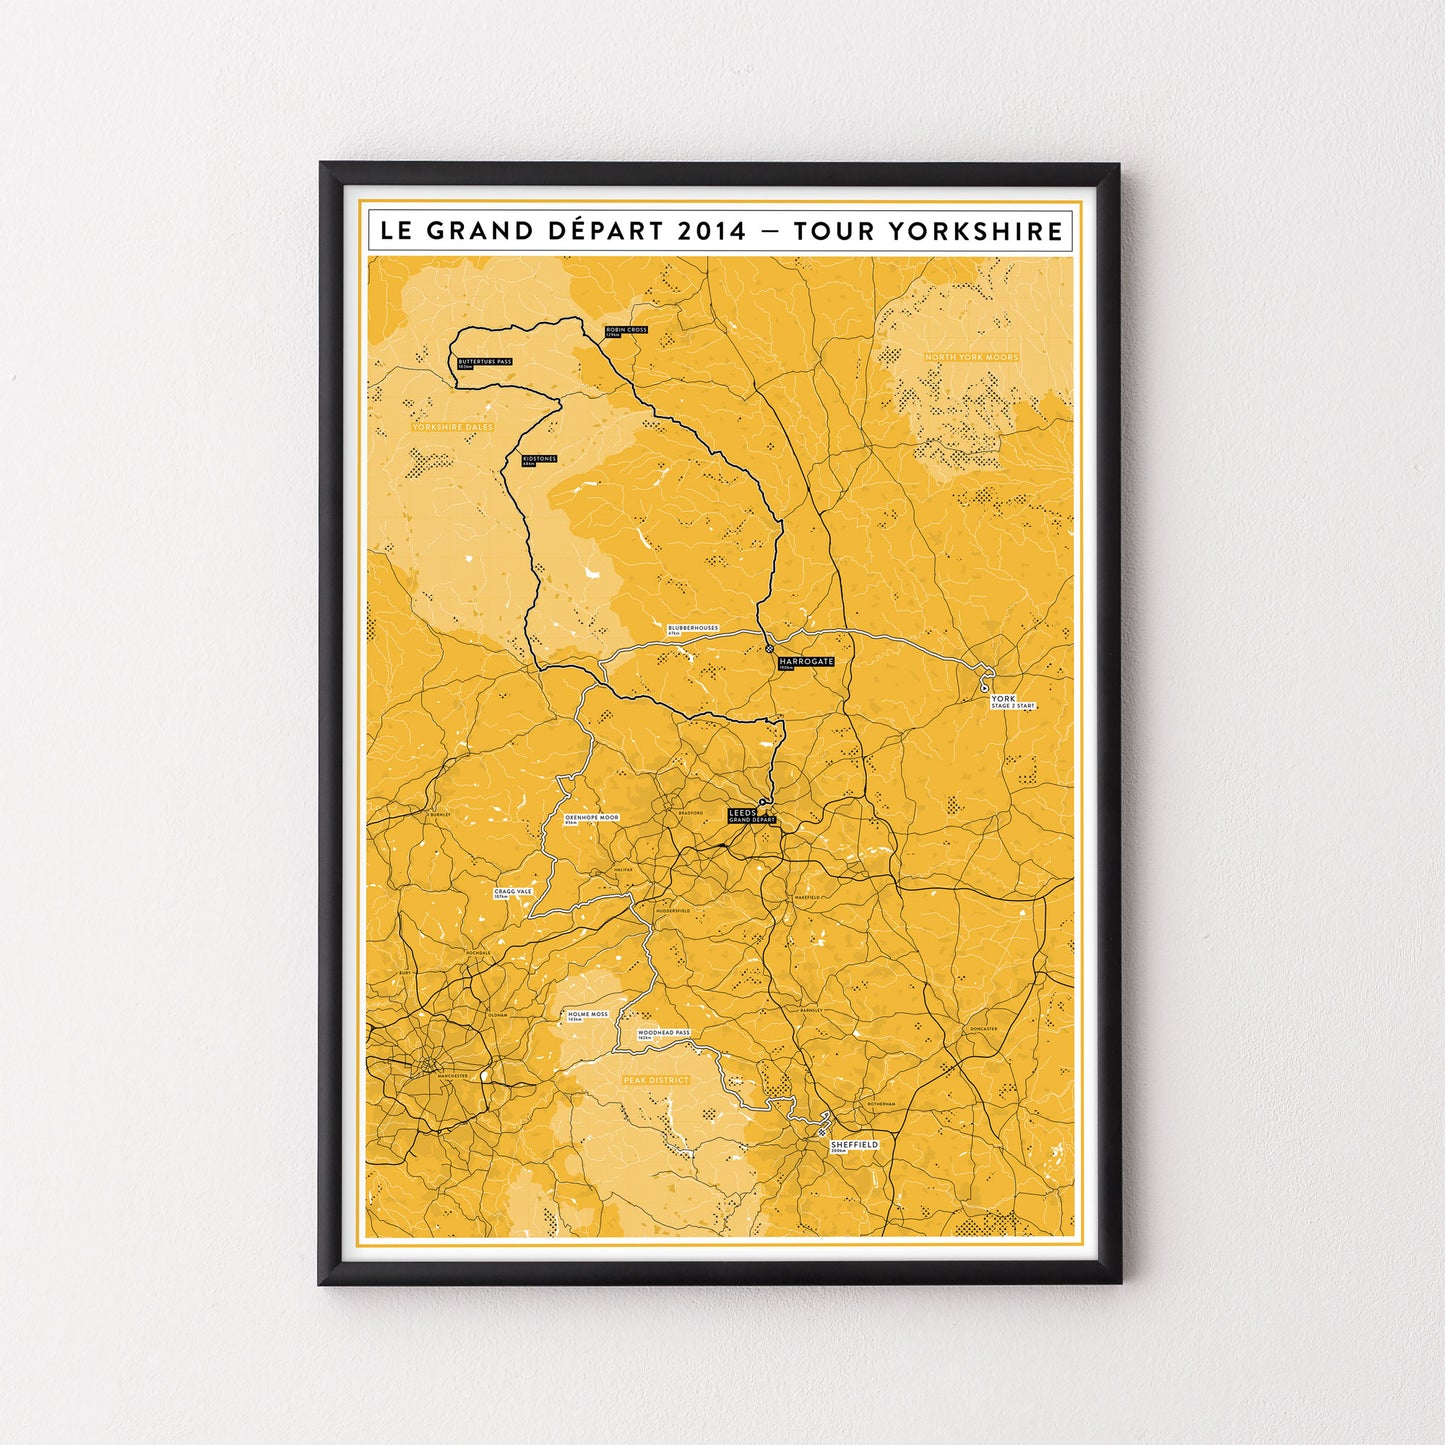 Tour de France 2014 Stages 1 & 2 Map Yorkshire – Poster – The English Cyclist